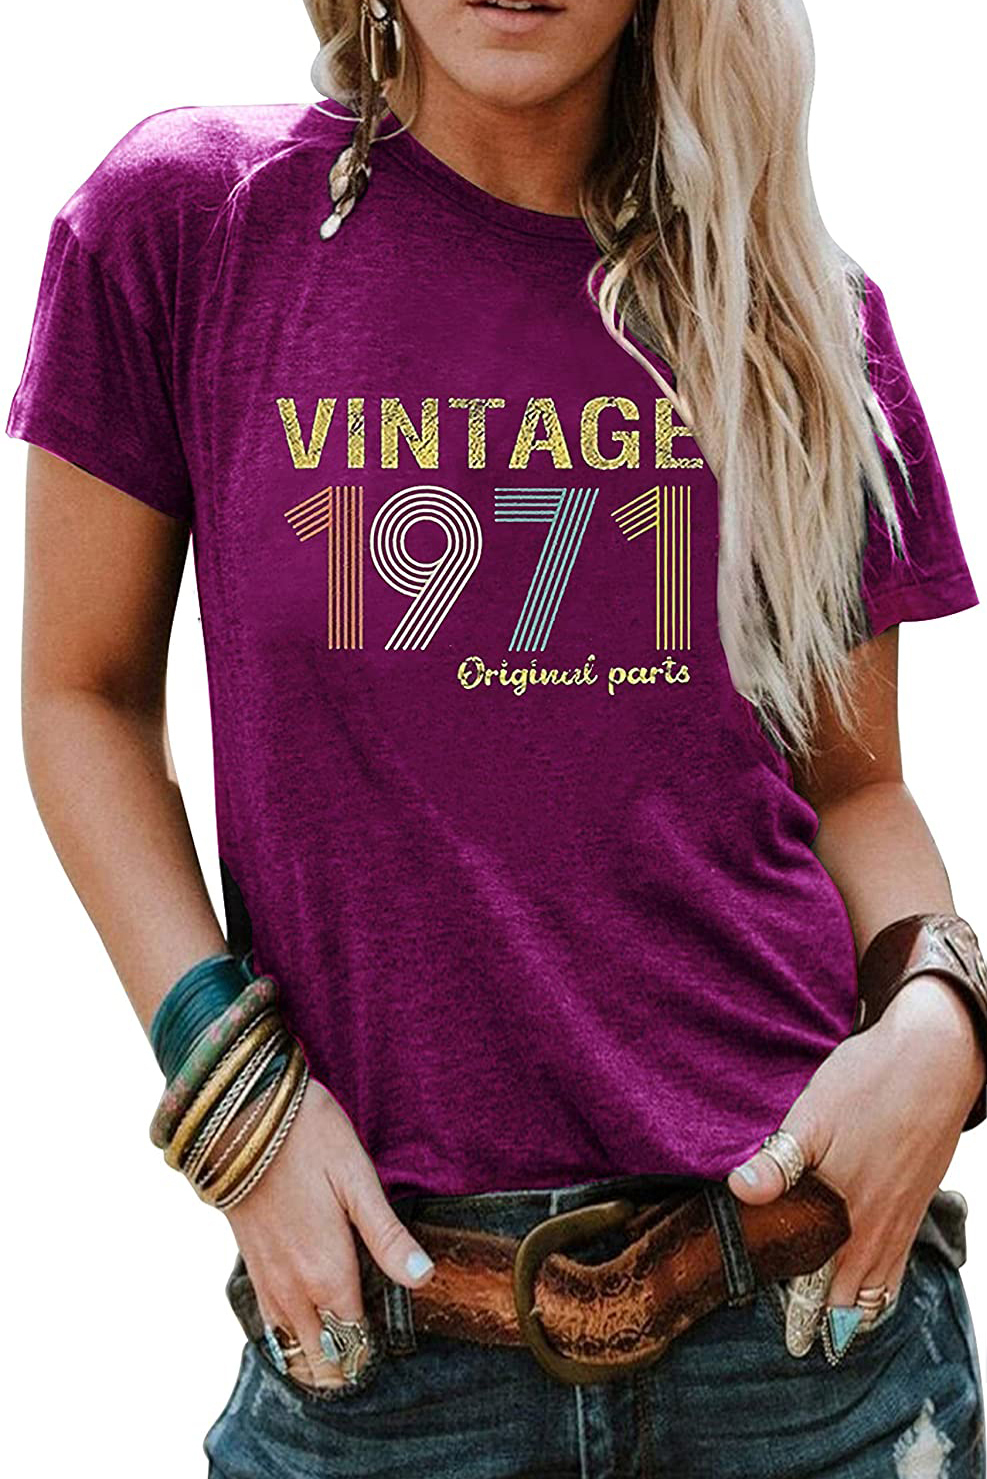 Wholesale Other Category, Cheap VINTAGE 1971 T-shirt Online